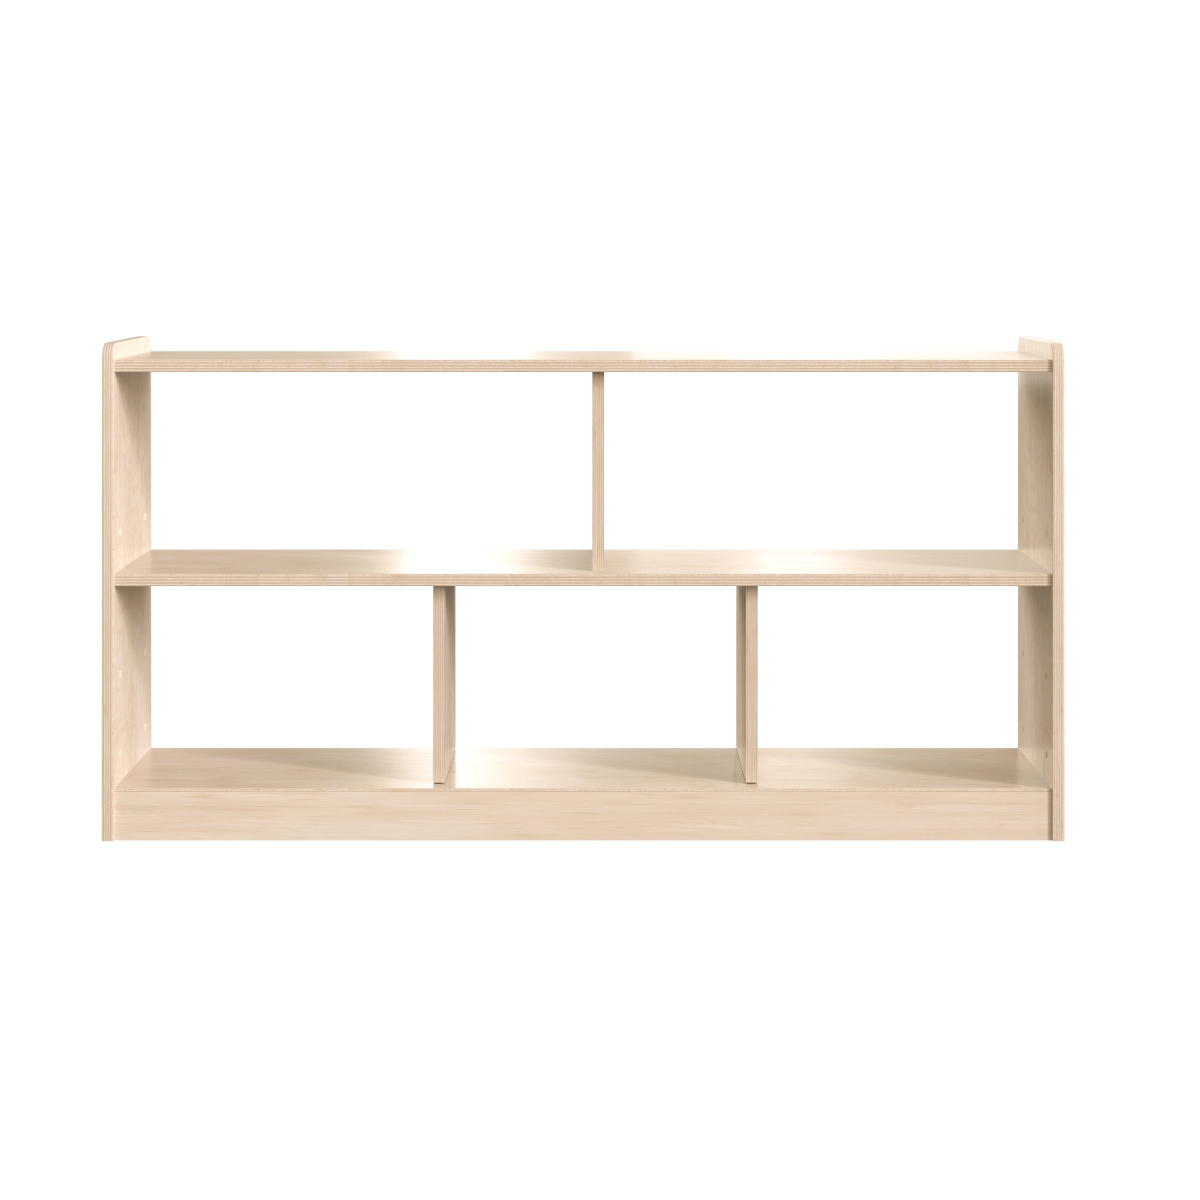 Picture of Flash Furniture MK-KE23957-GG Bright Beginnings Commercial Grade Extra Wide 5 Section Modular Wooden Classroom Open Storage Unit, Safe, Kid Friendly Design, Natural